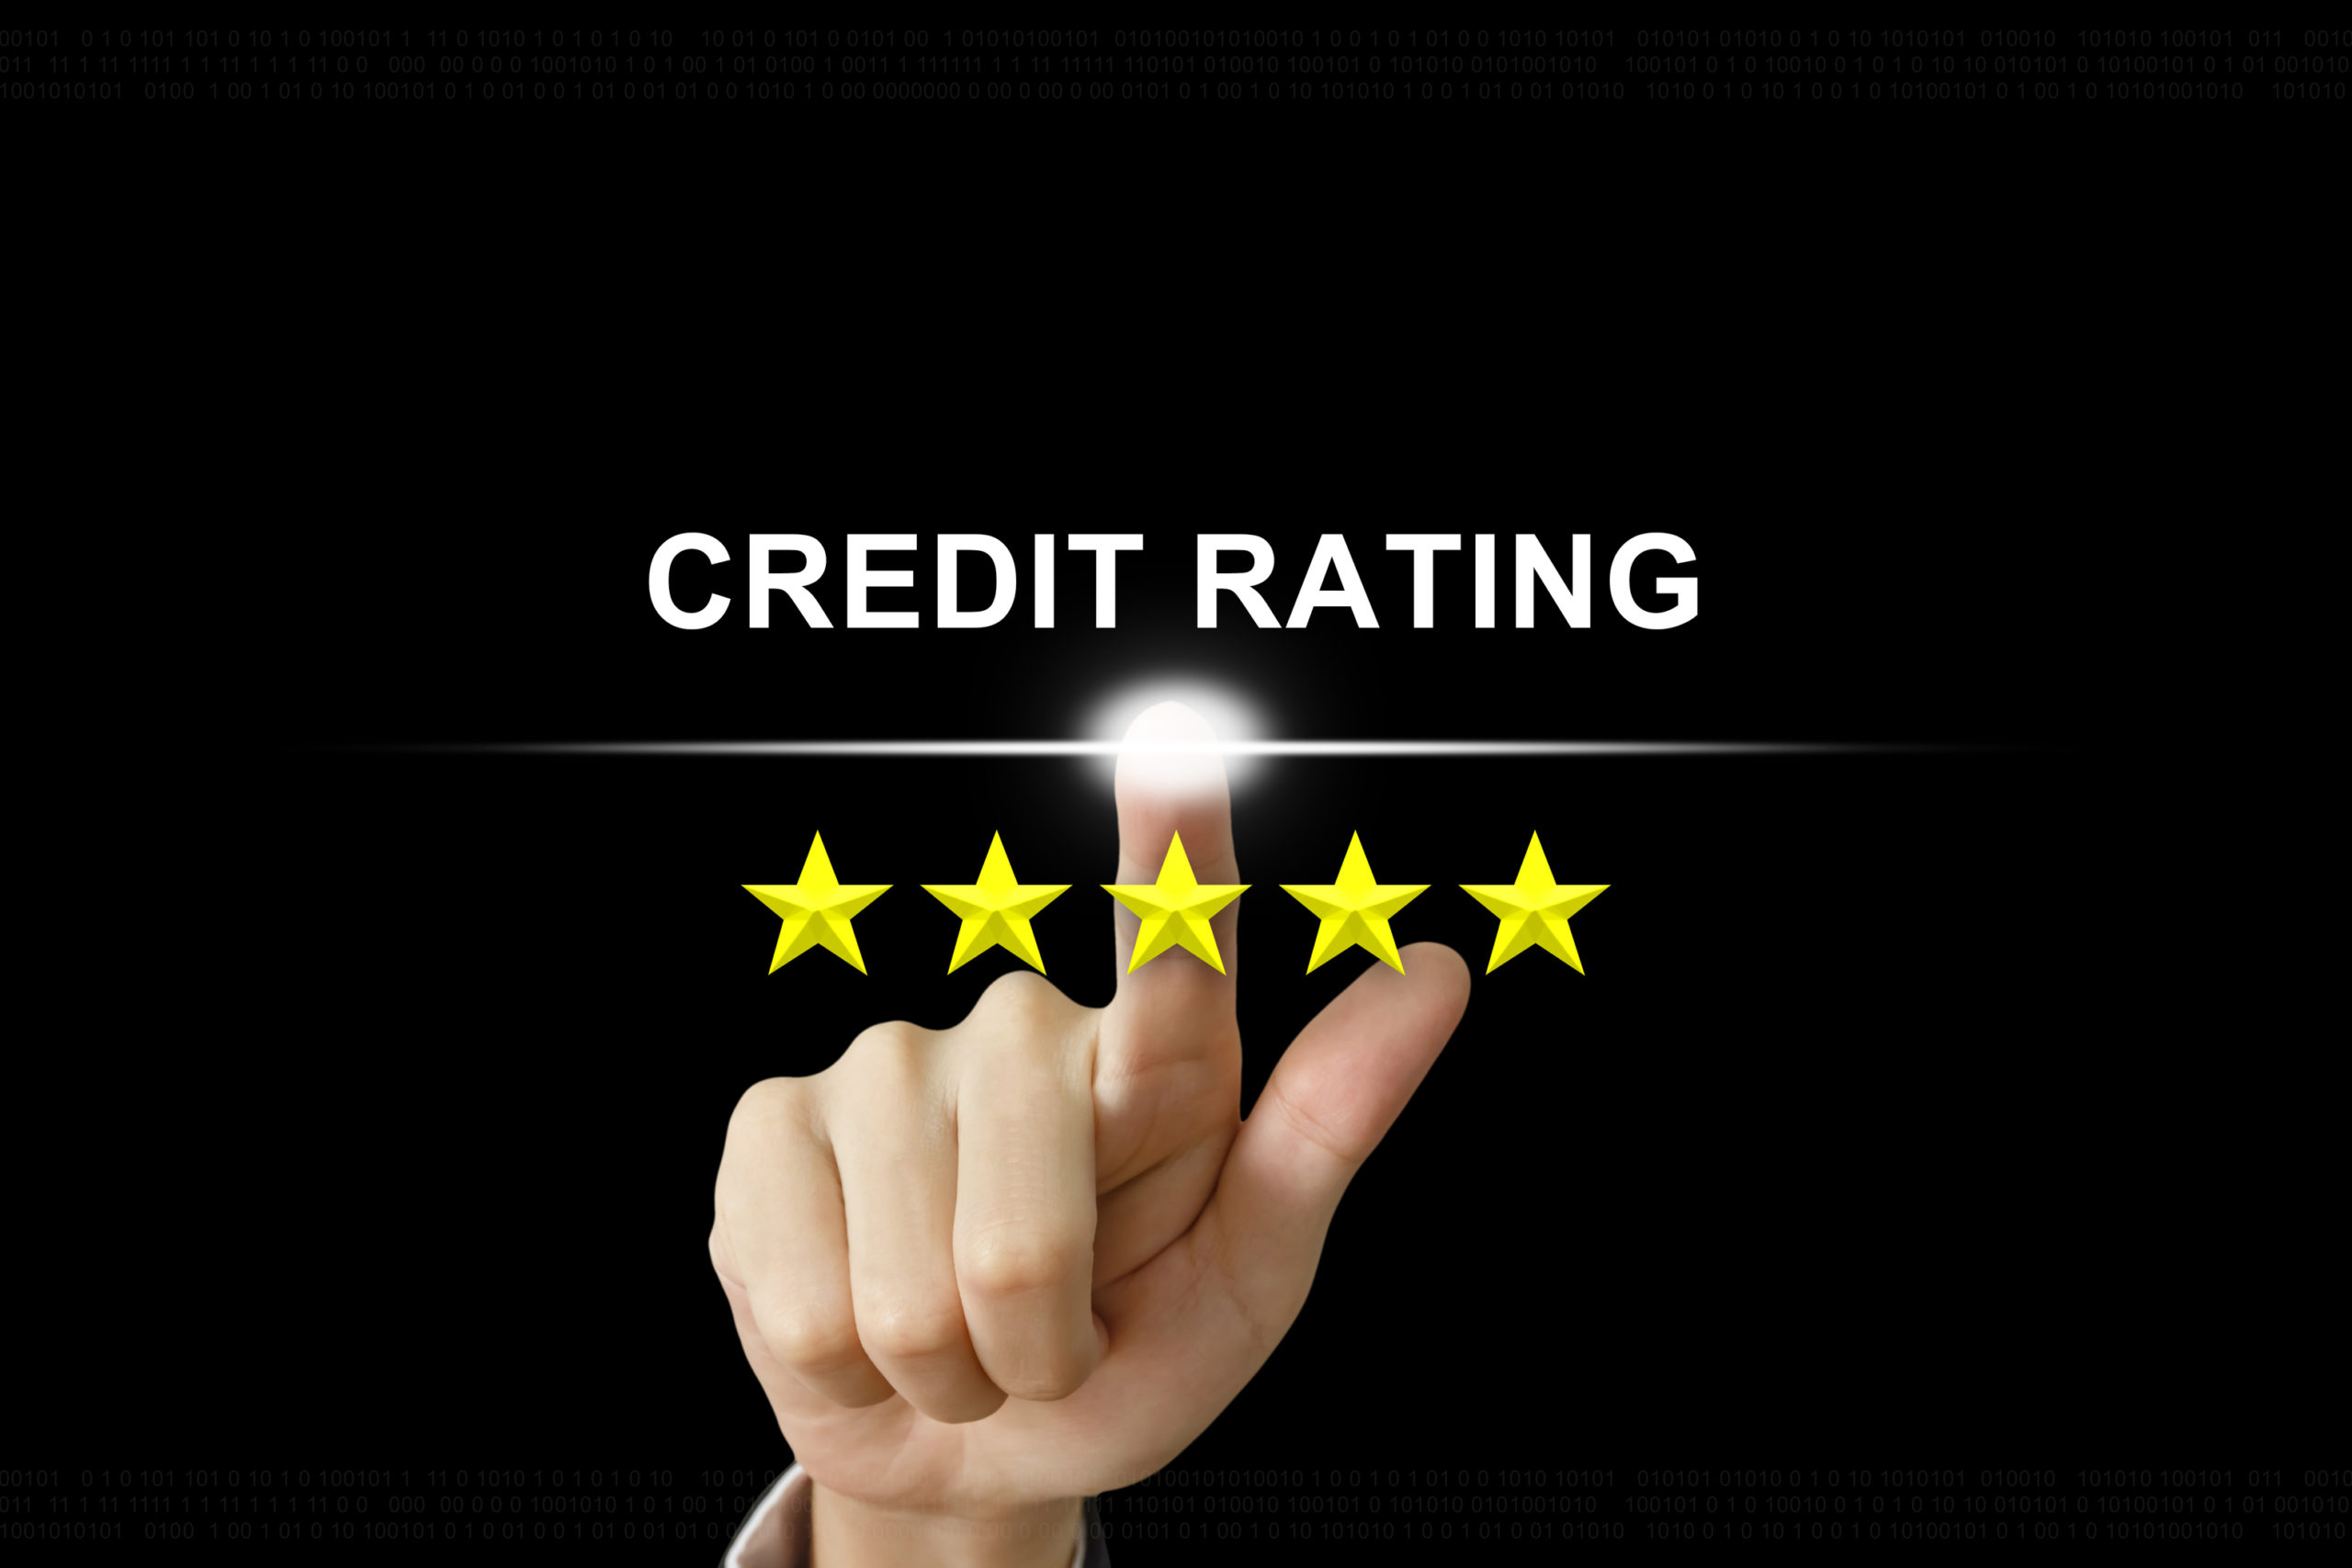 Do You Need Help Building Your Credit Rating?